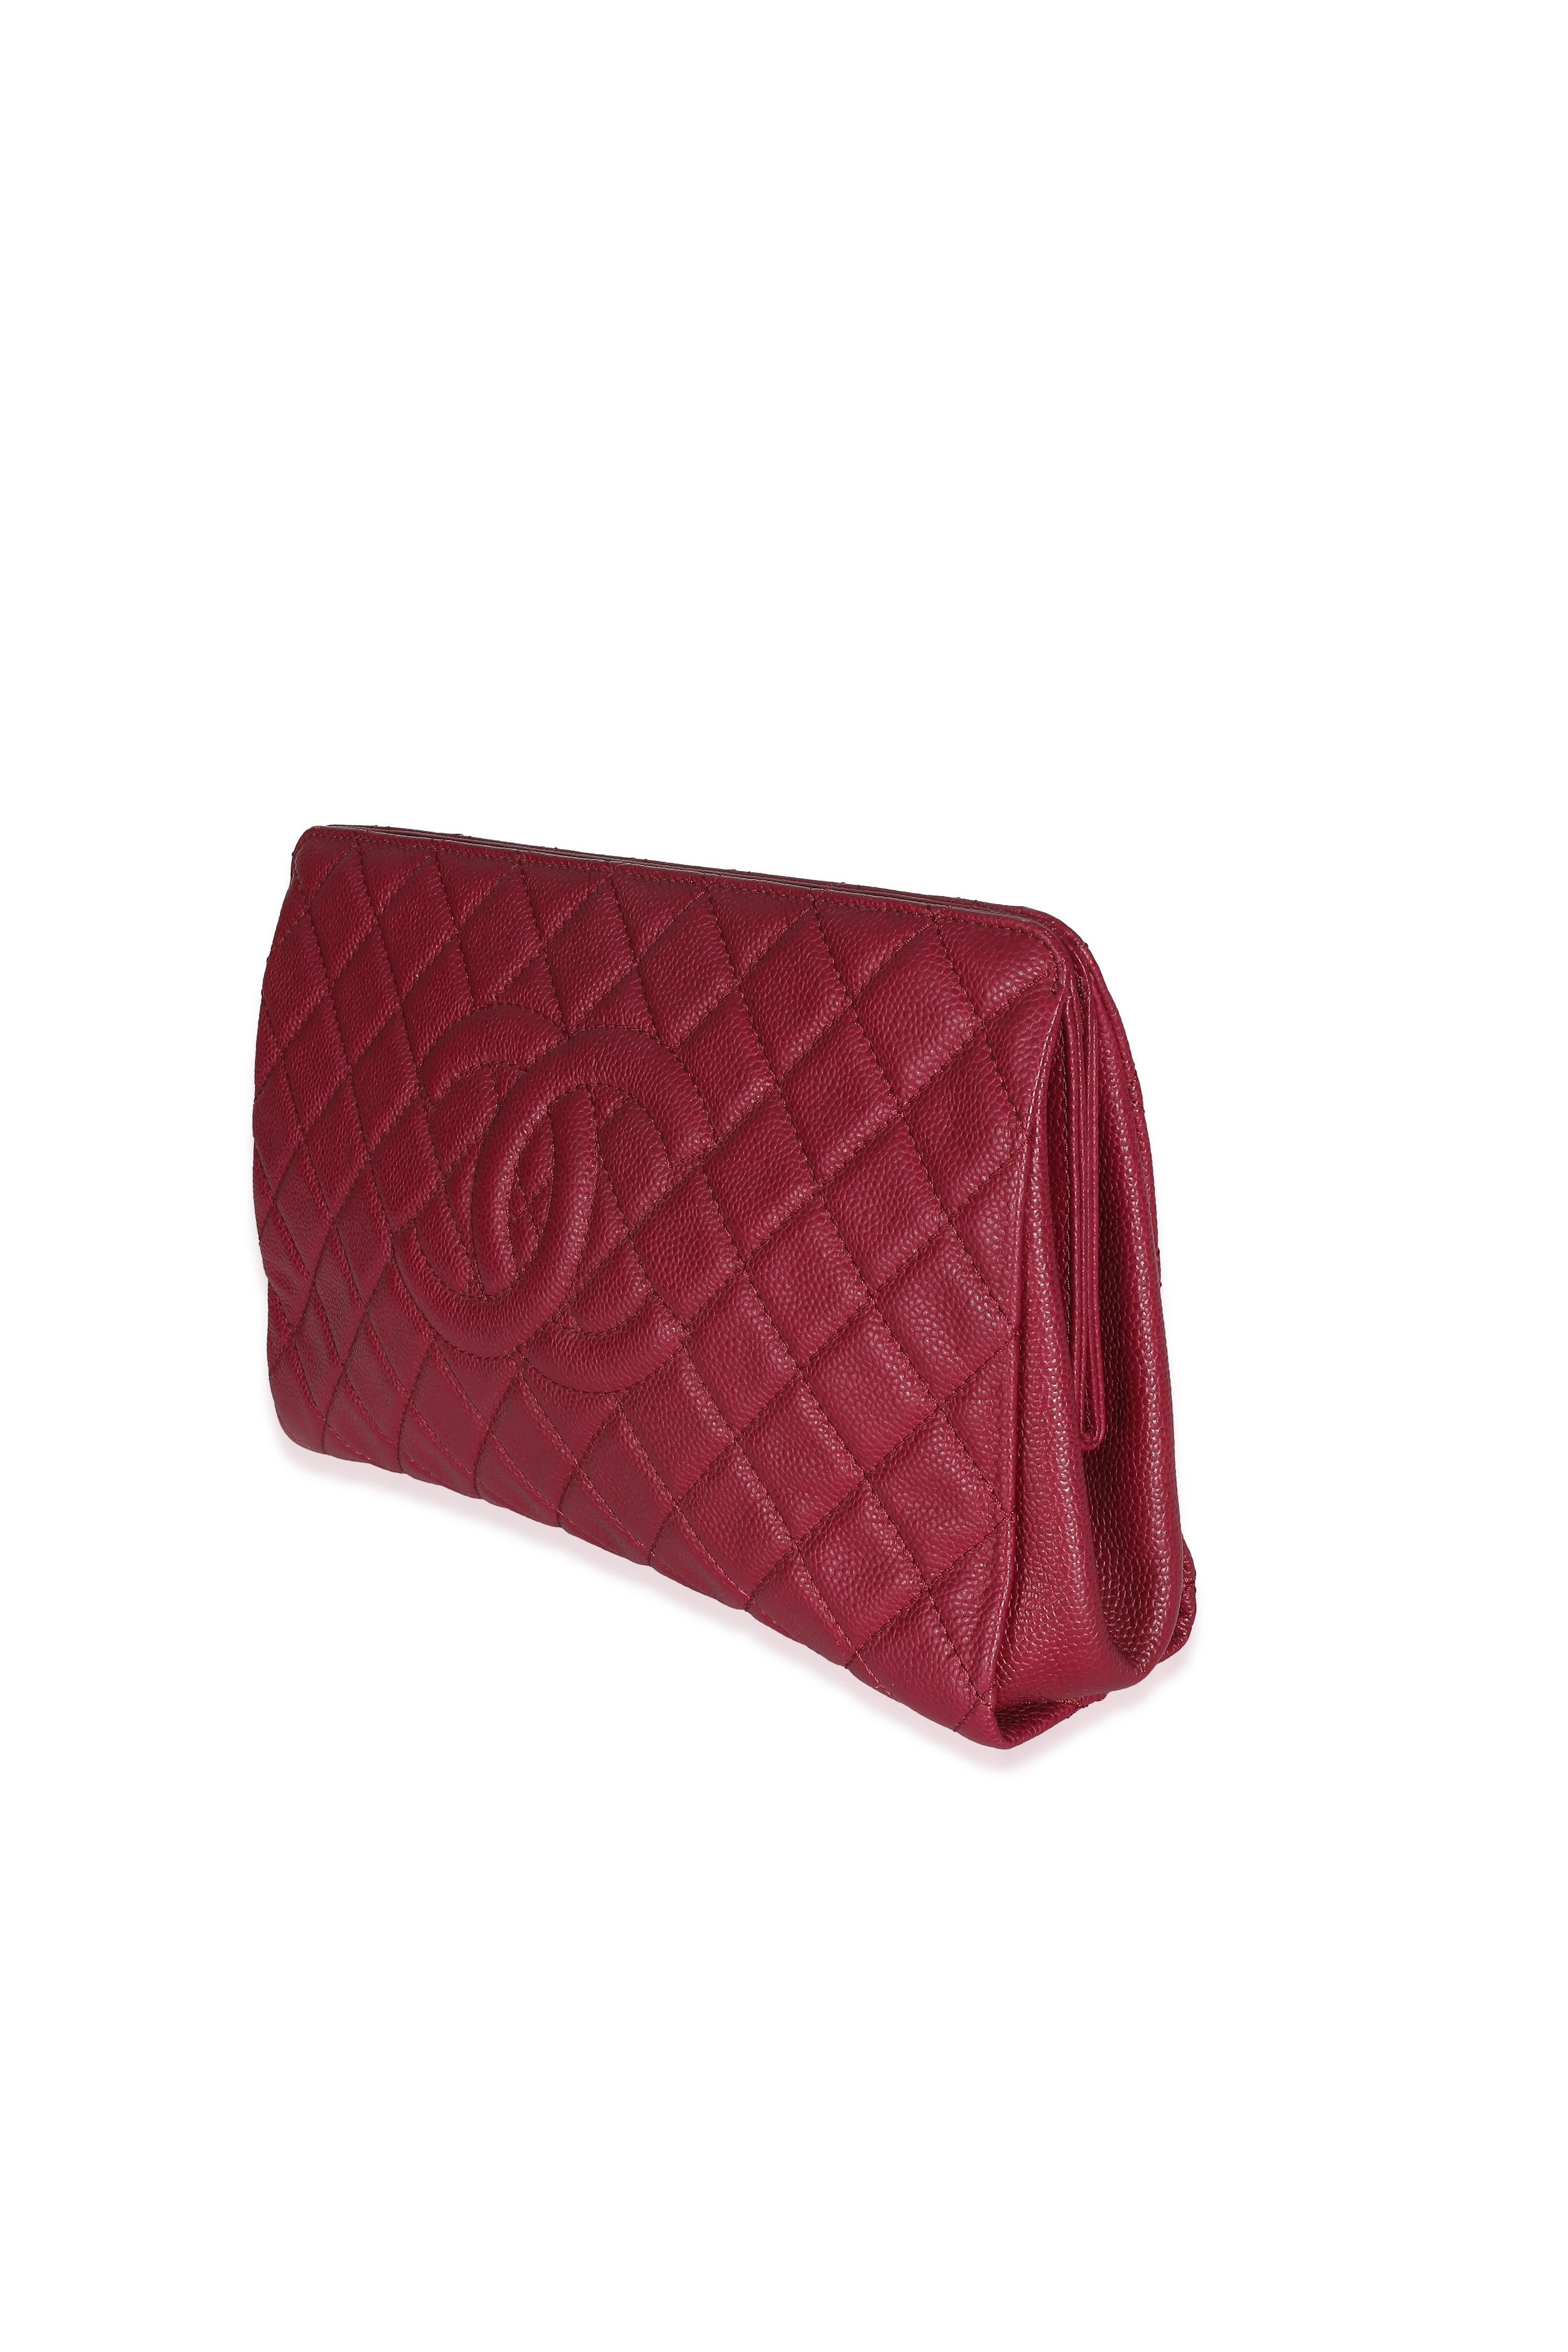 Women's Chanel Dark Pink Quilted Caviar CC Timeless Frame Clutch